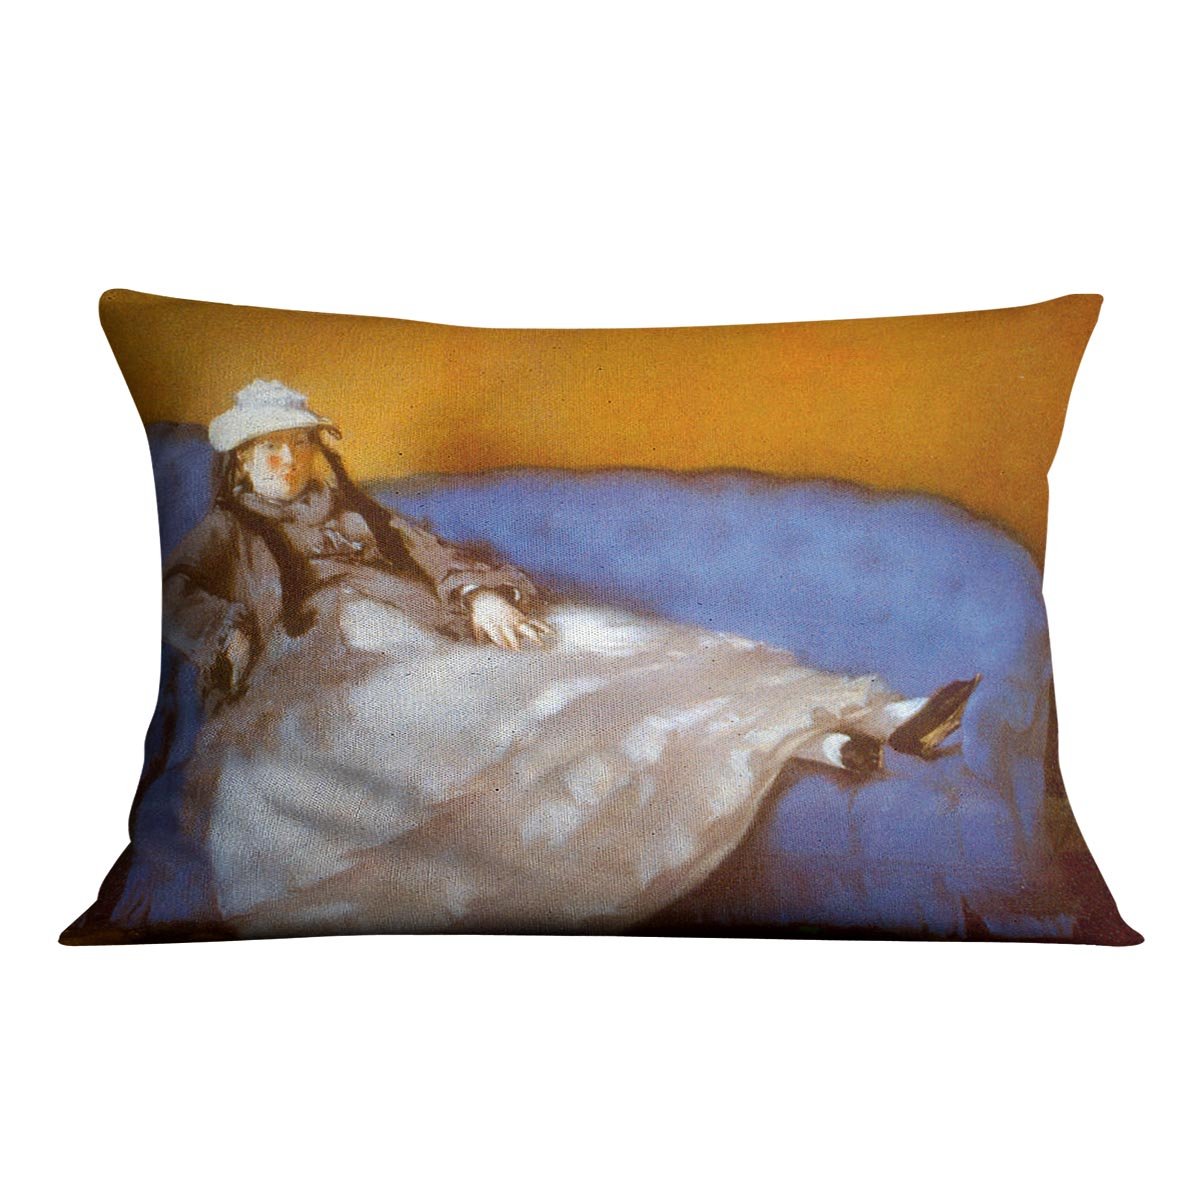 Madame Manet by Manet Throw Pillow